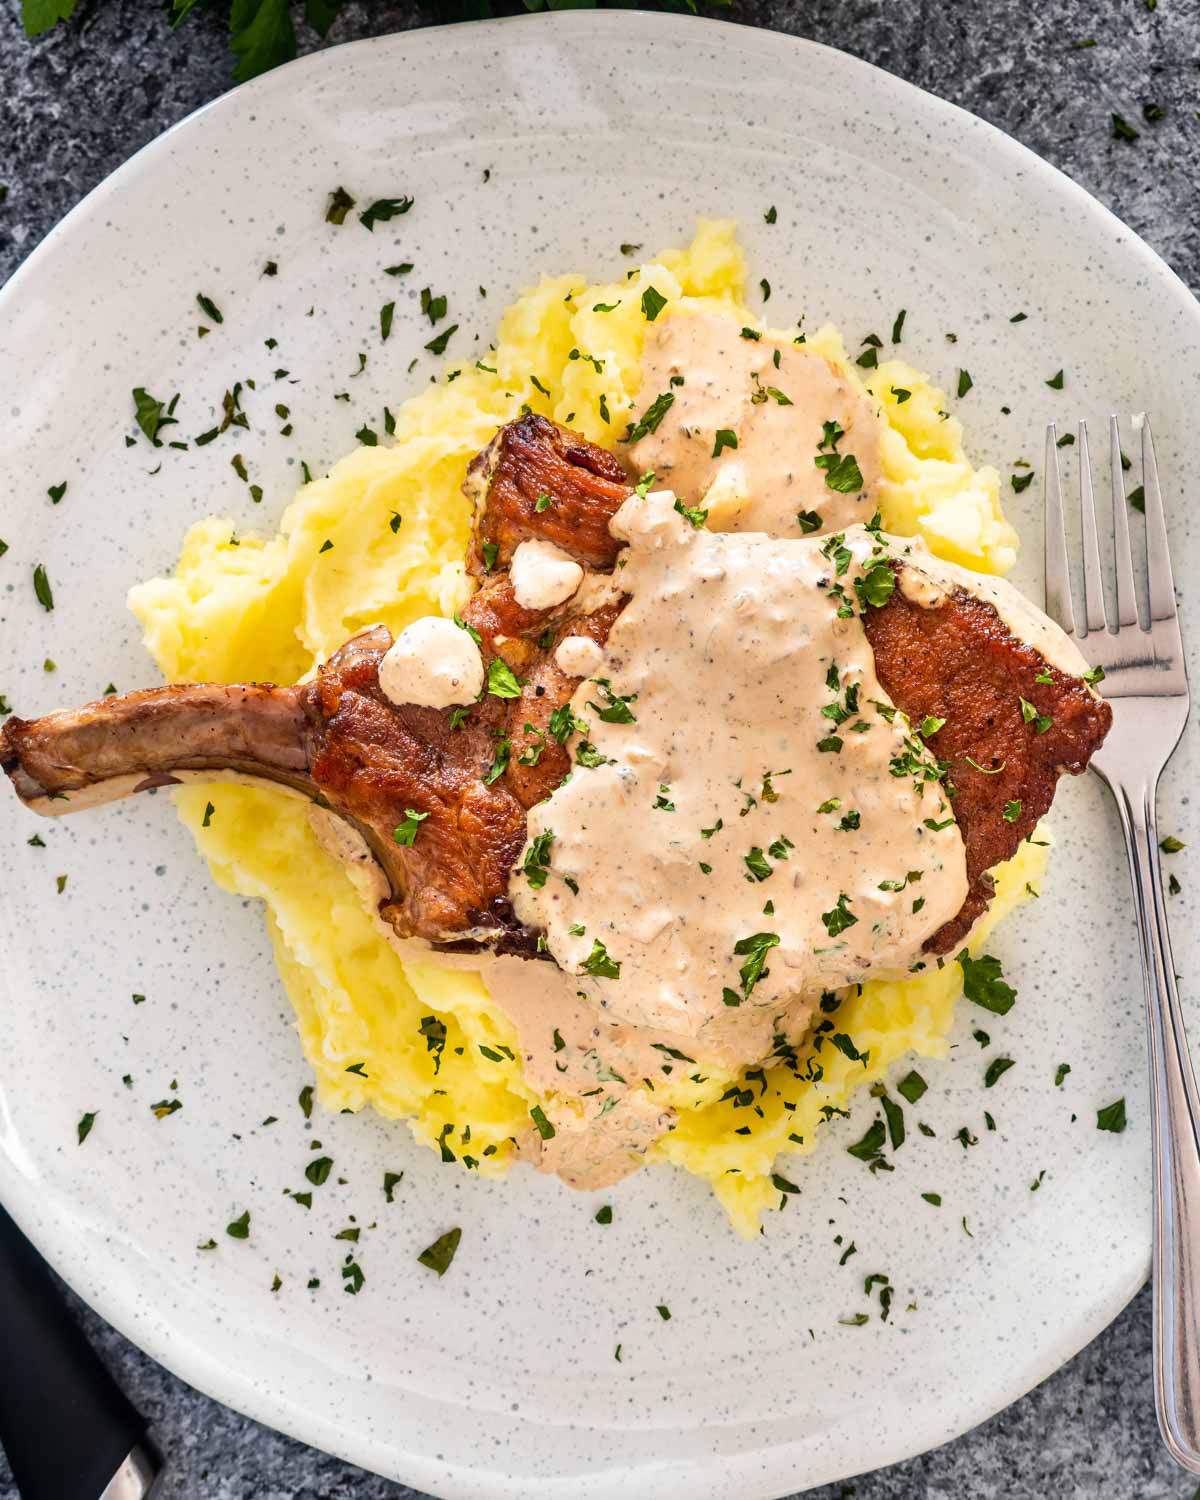 a pork chop over a bed of mashed potatoes with peppercorn sauce.